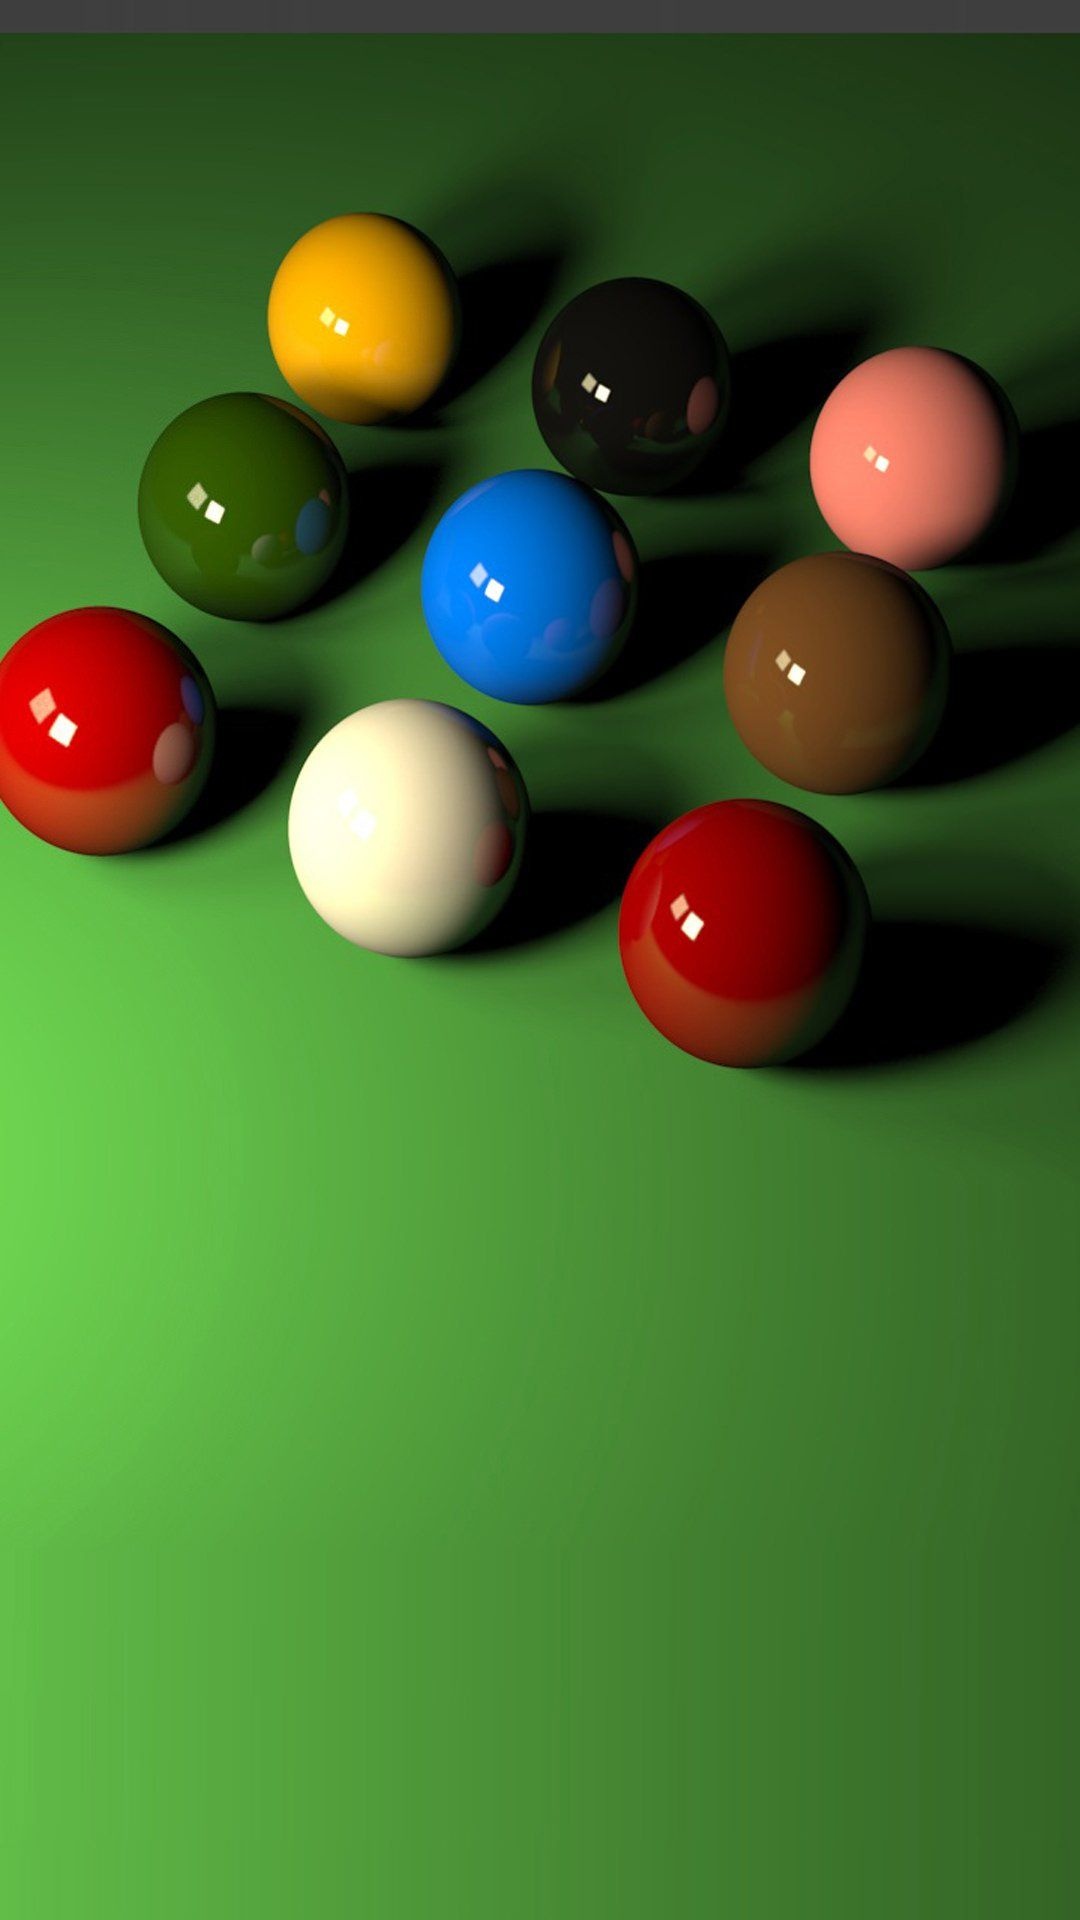 Top snooker wallpapers, Free download, Captivating backgrounds, Snooker enthusiasts' choice, 1080x1920 Full HD Phone